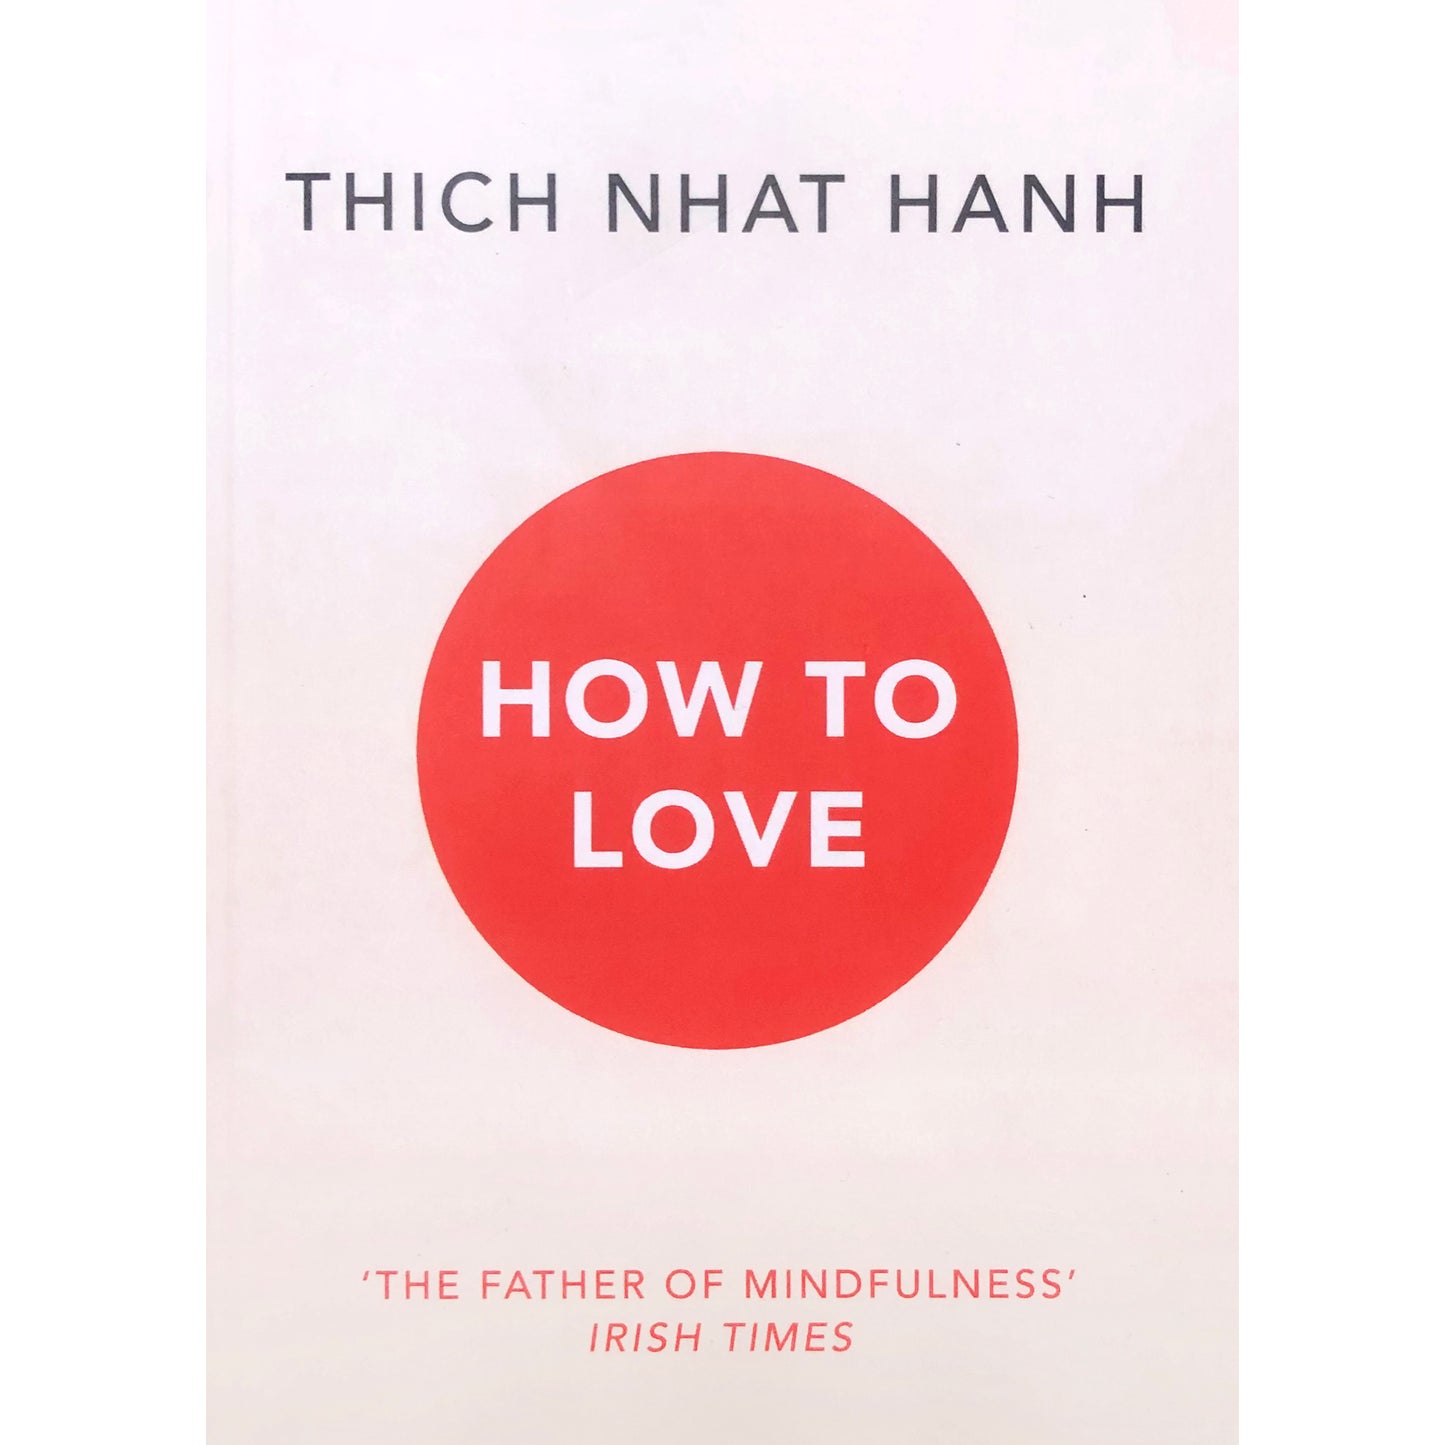 How to Love by Thich Nhat Hanh